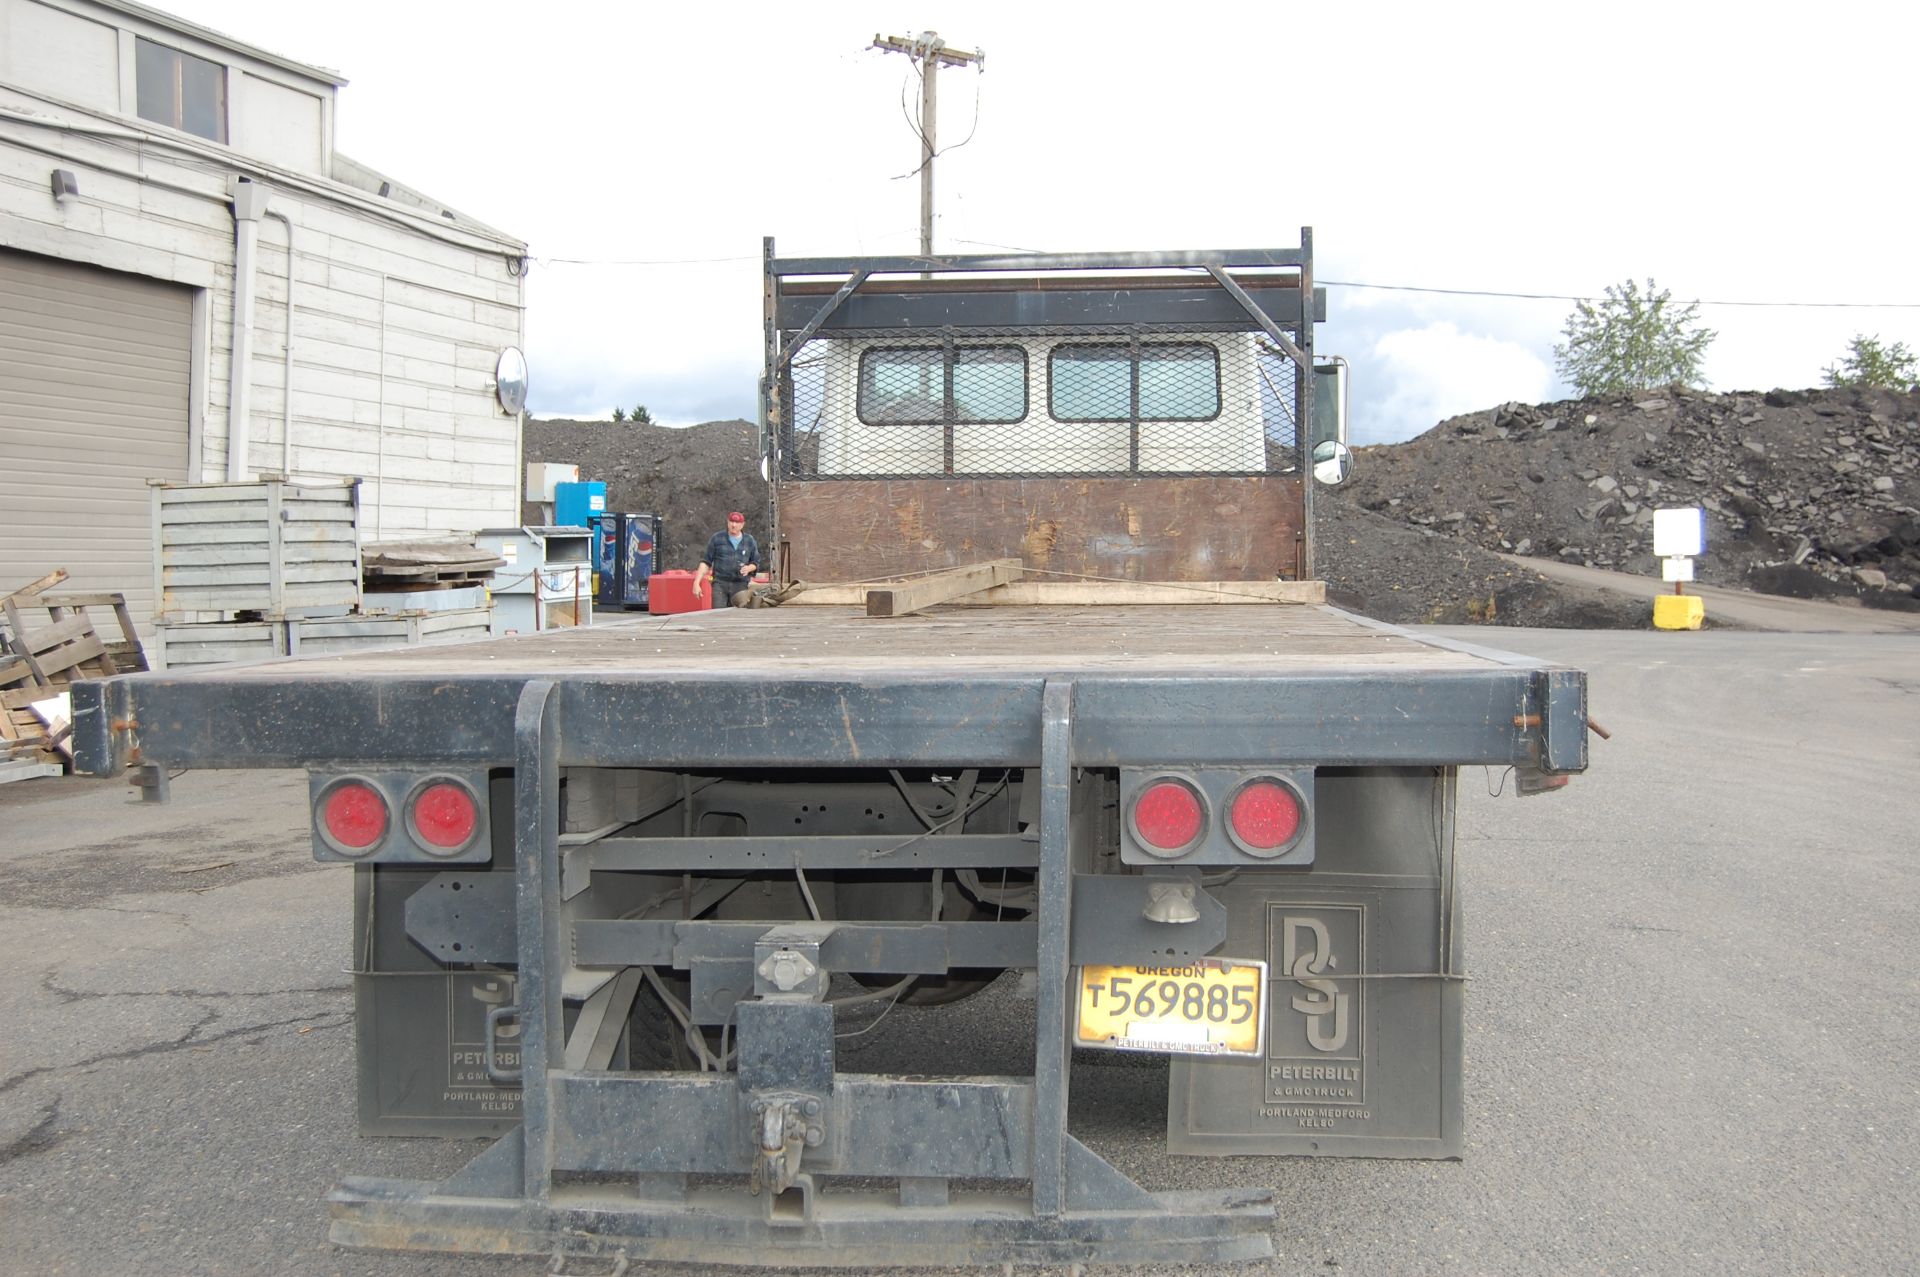 1996 Freightliner F70 20' Tandem axle Flatbed Truck 6 speed manual transmission - Image 8 of 8